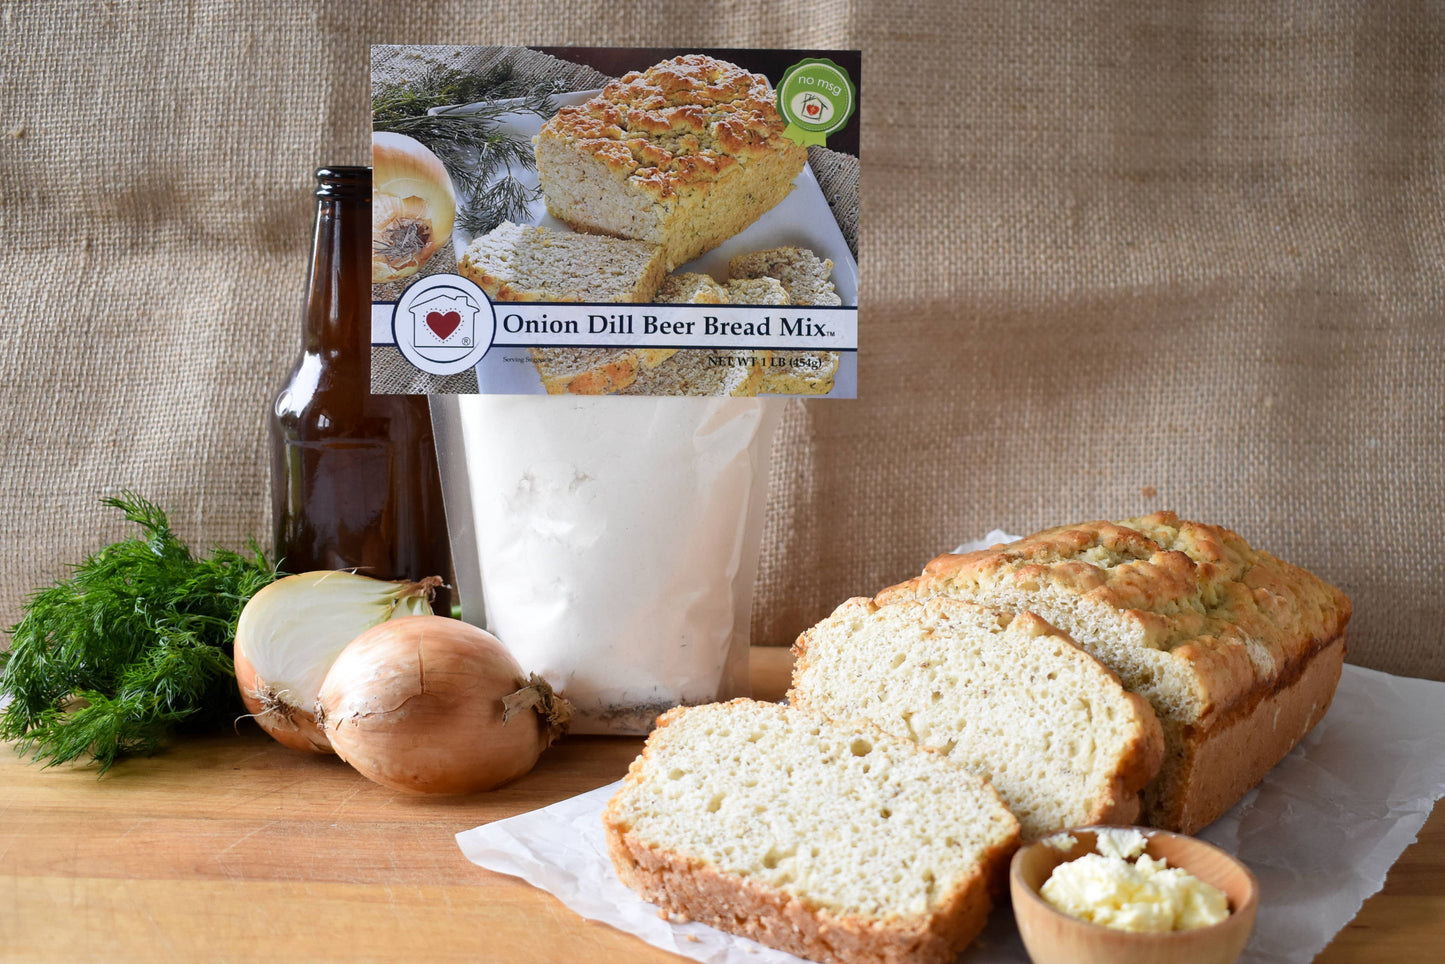 Onion Dill Beer Bread Mix